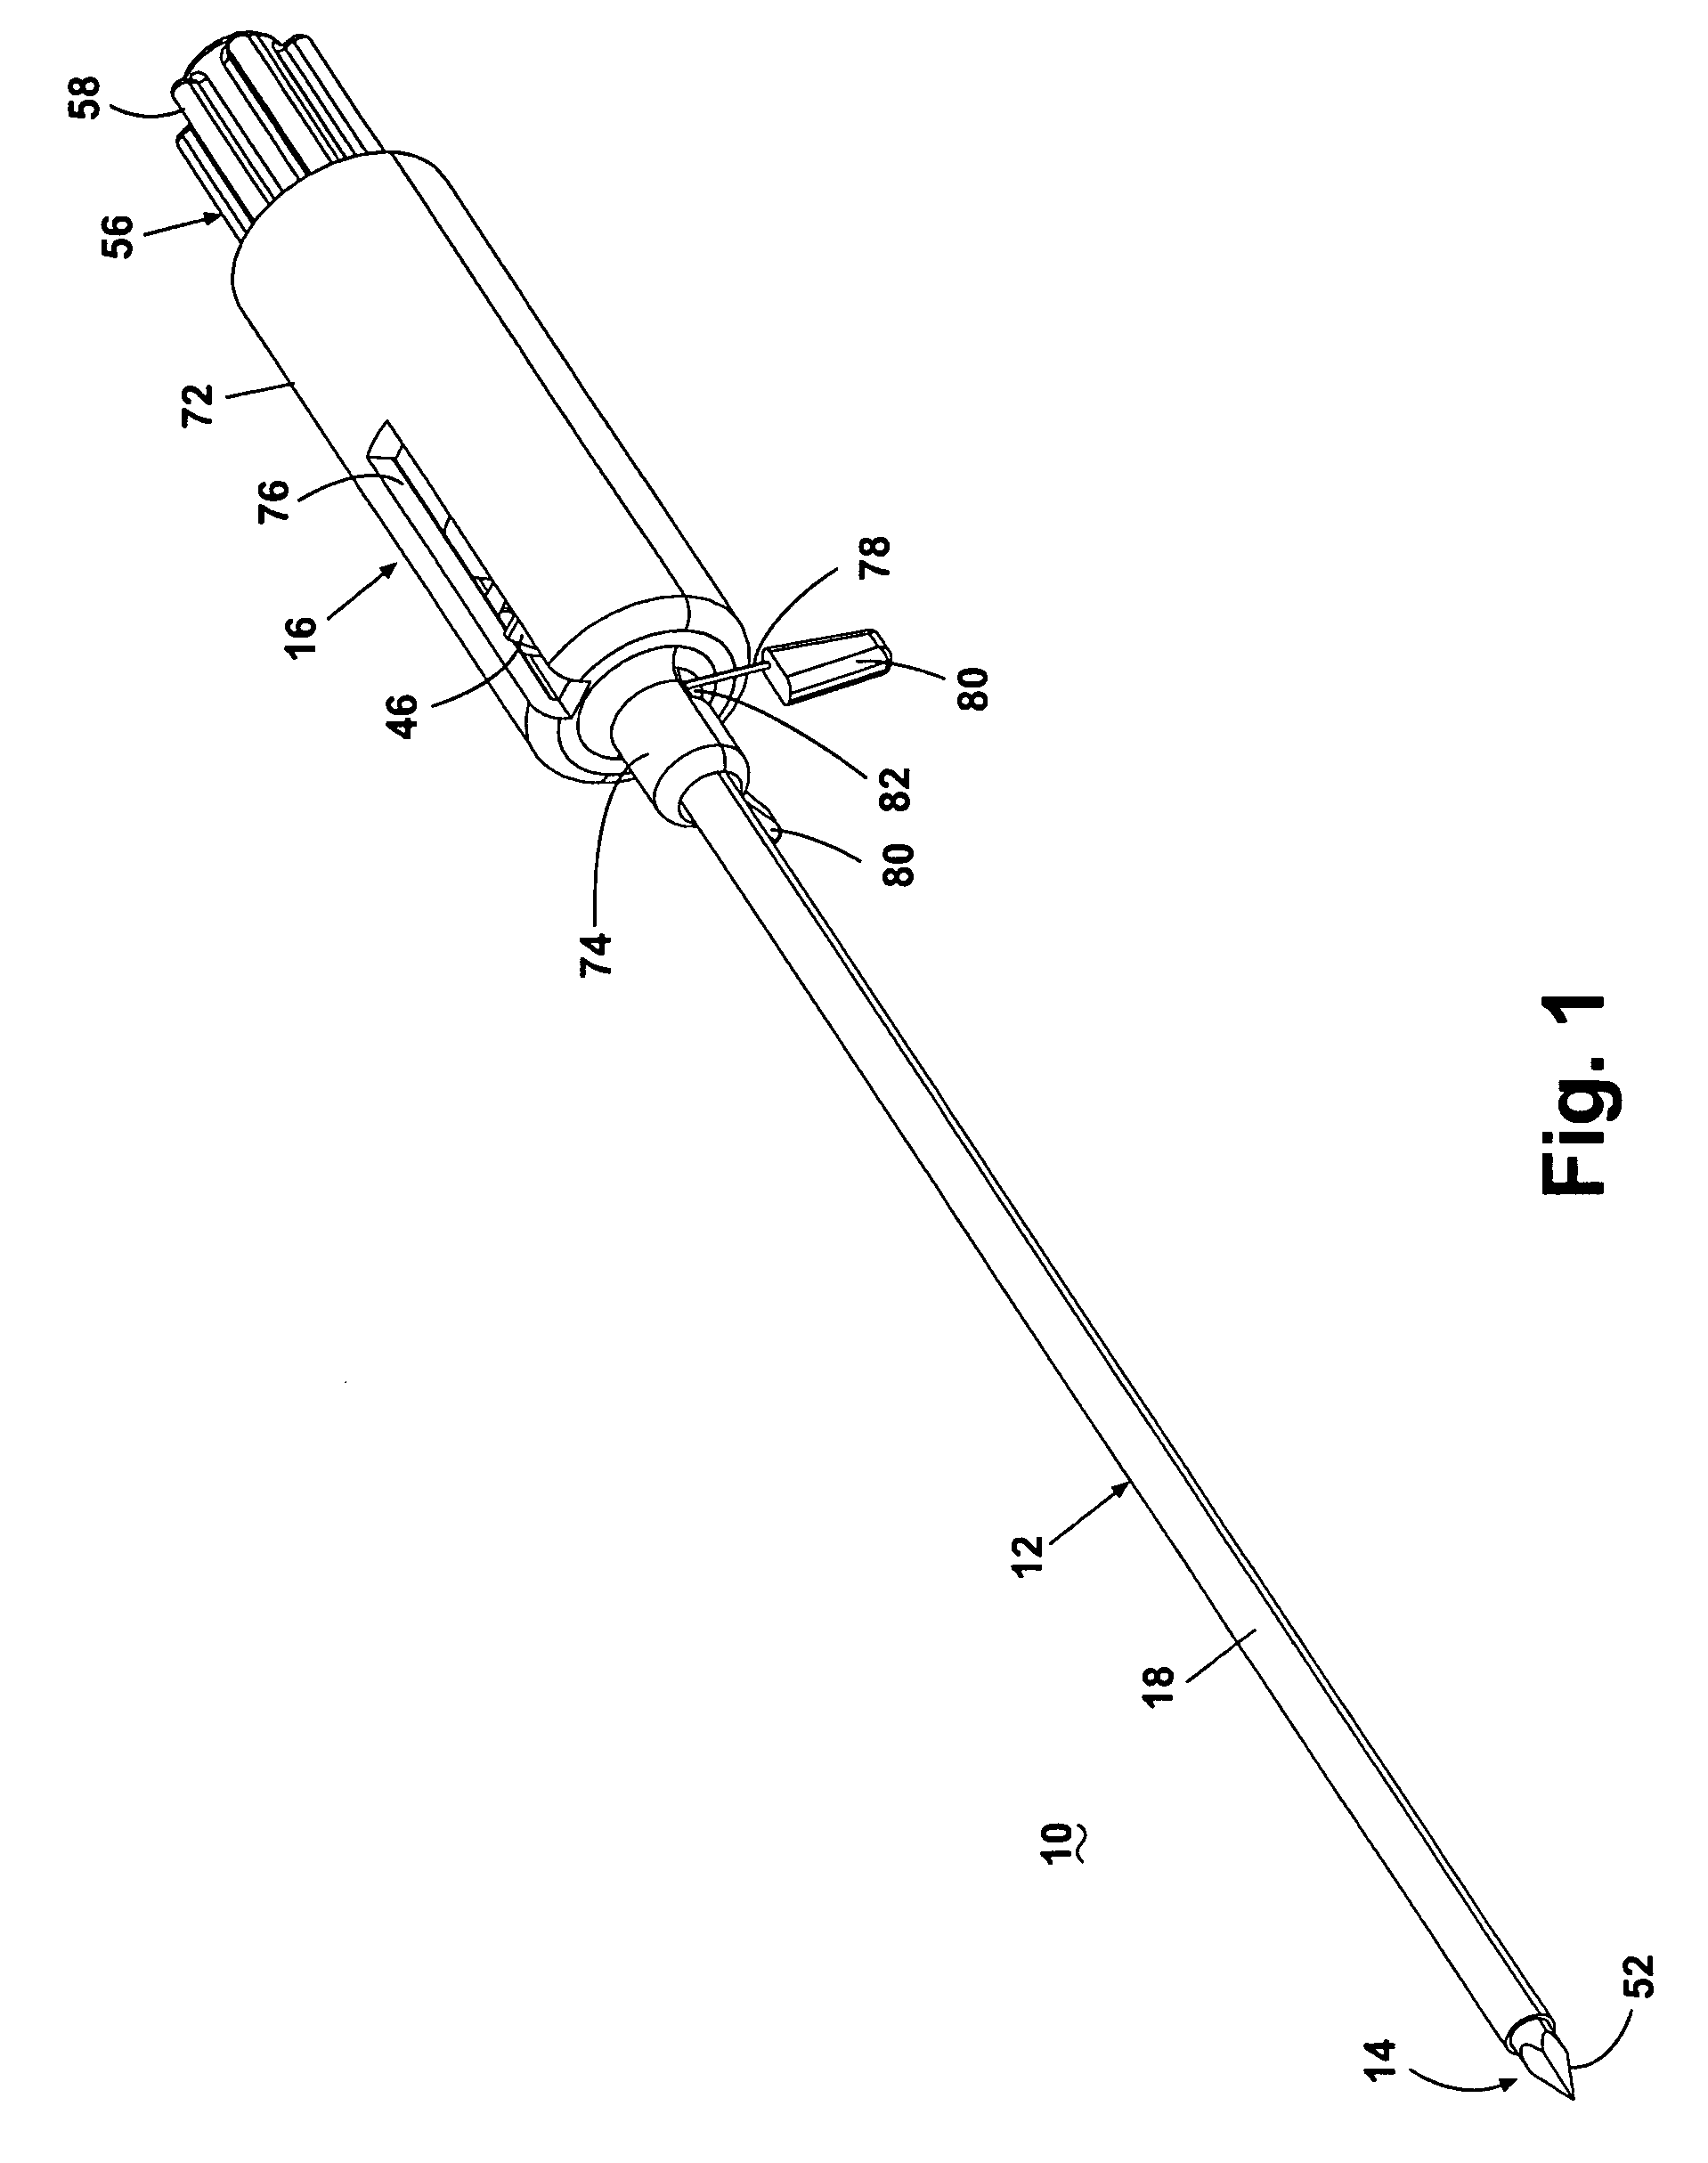 Coaxial needle assembly